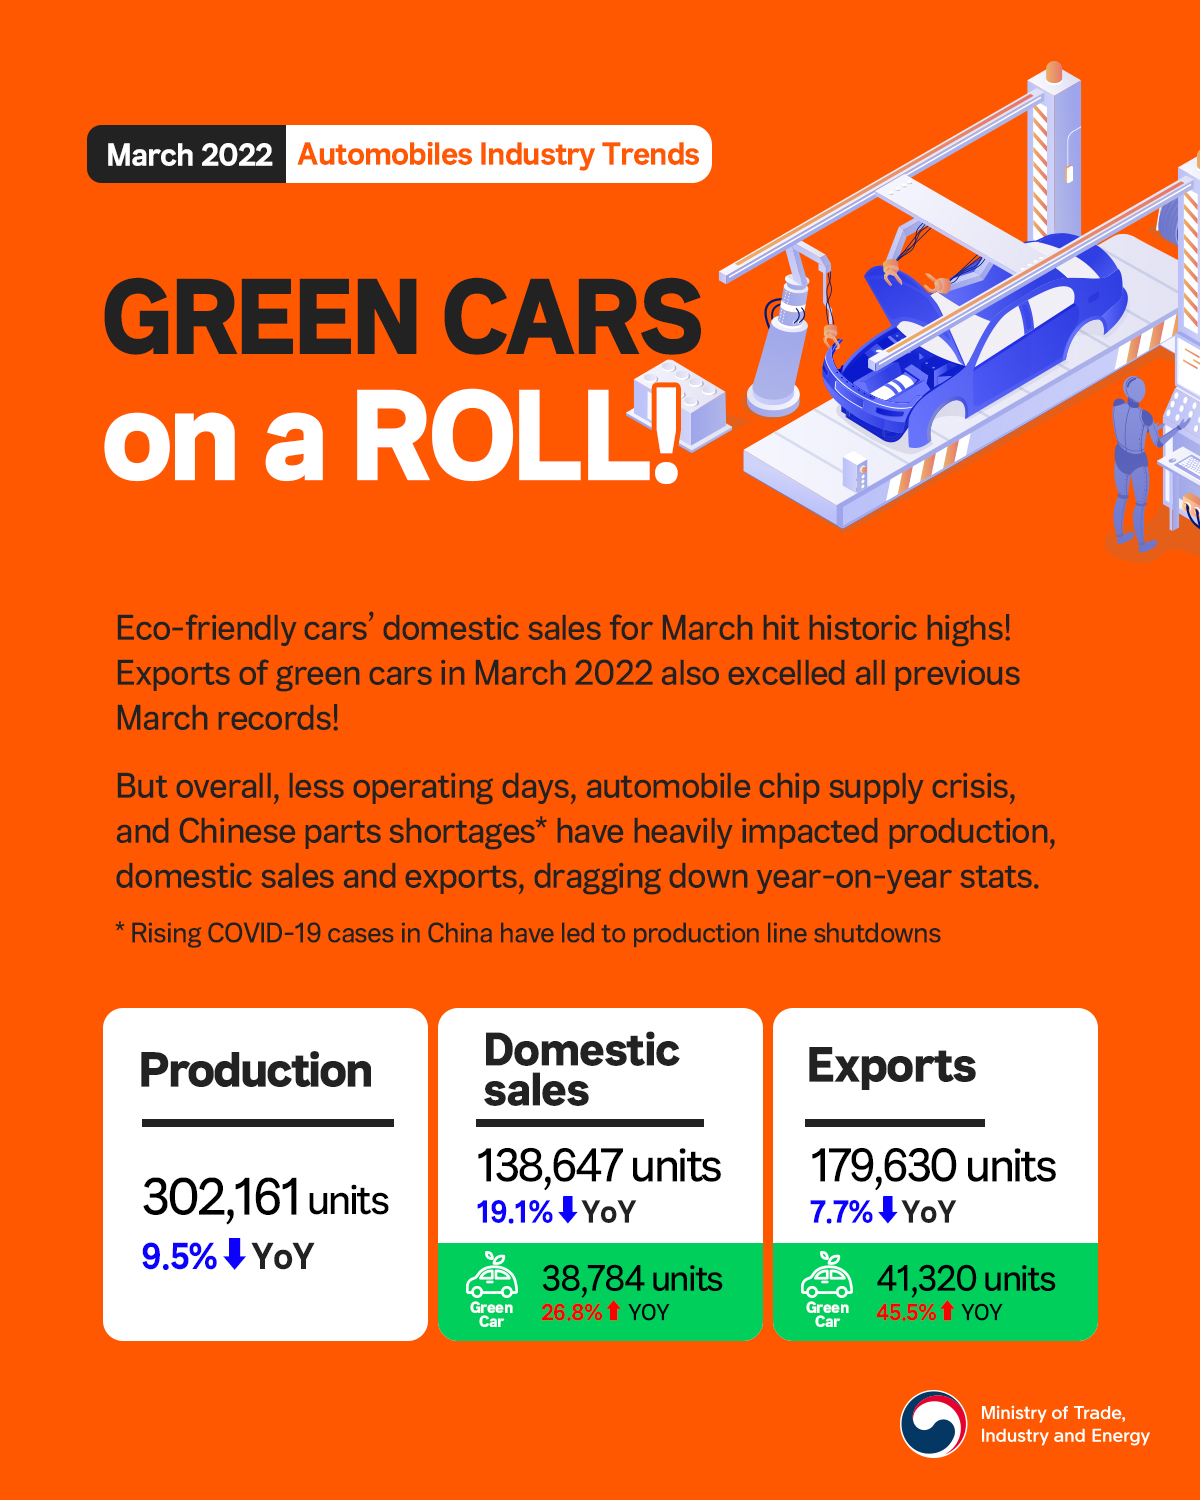 Korea's green cars exports are on a roll! Image 0